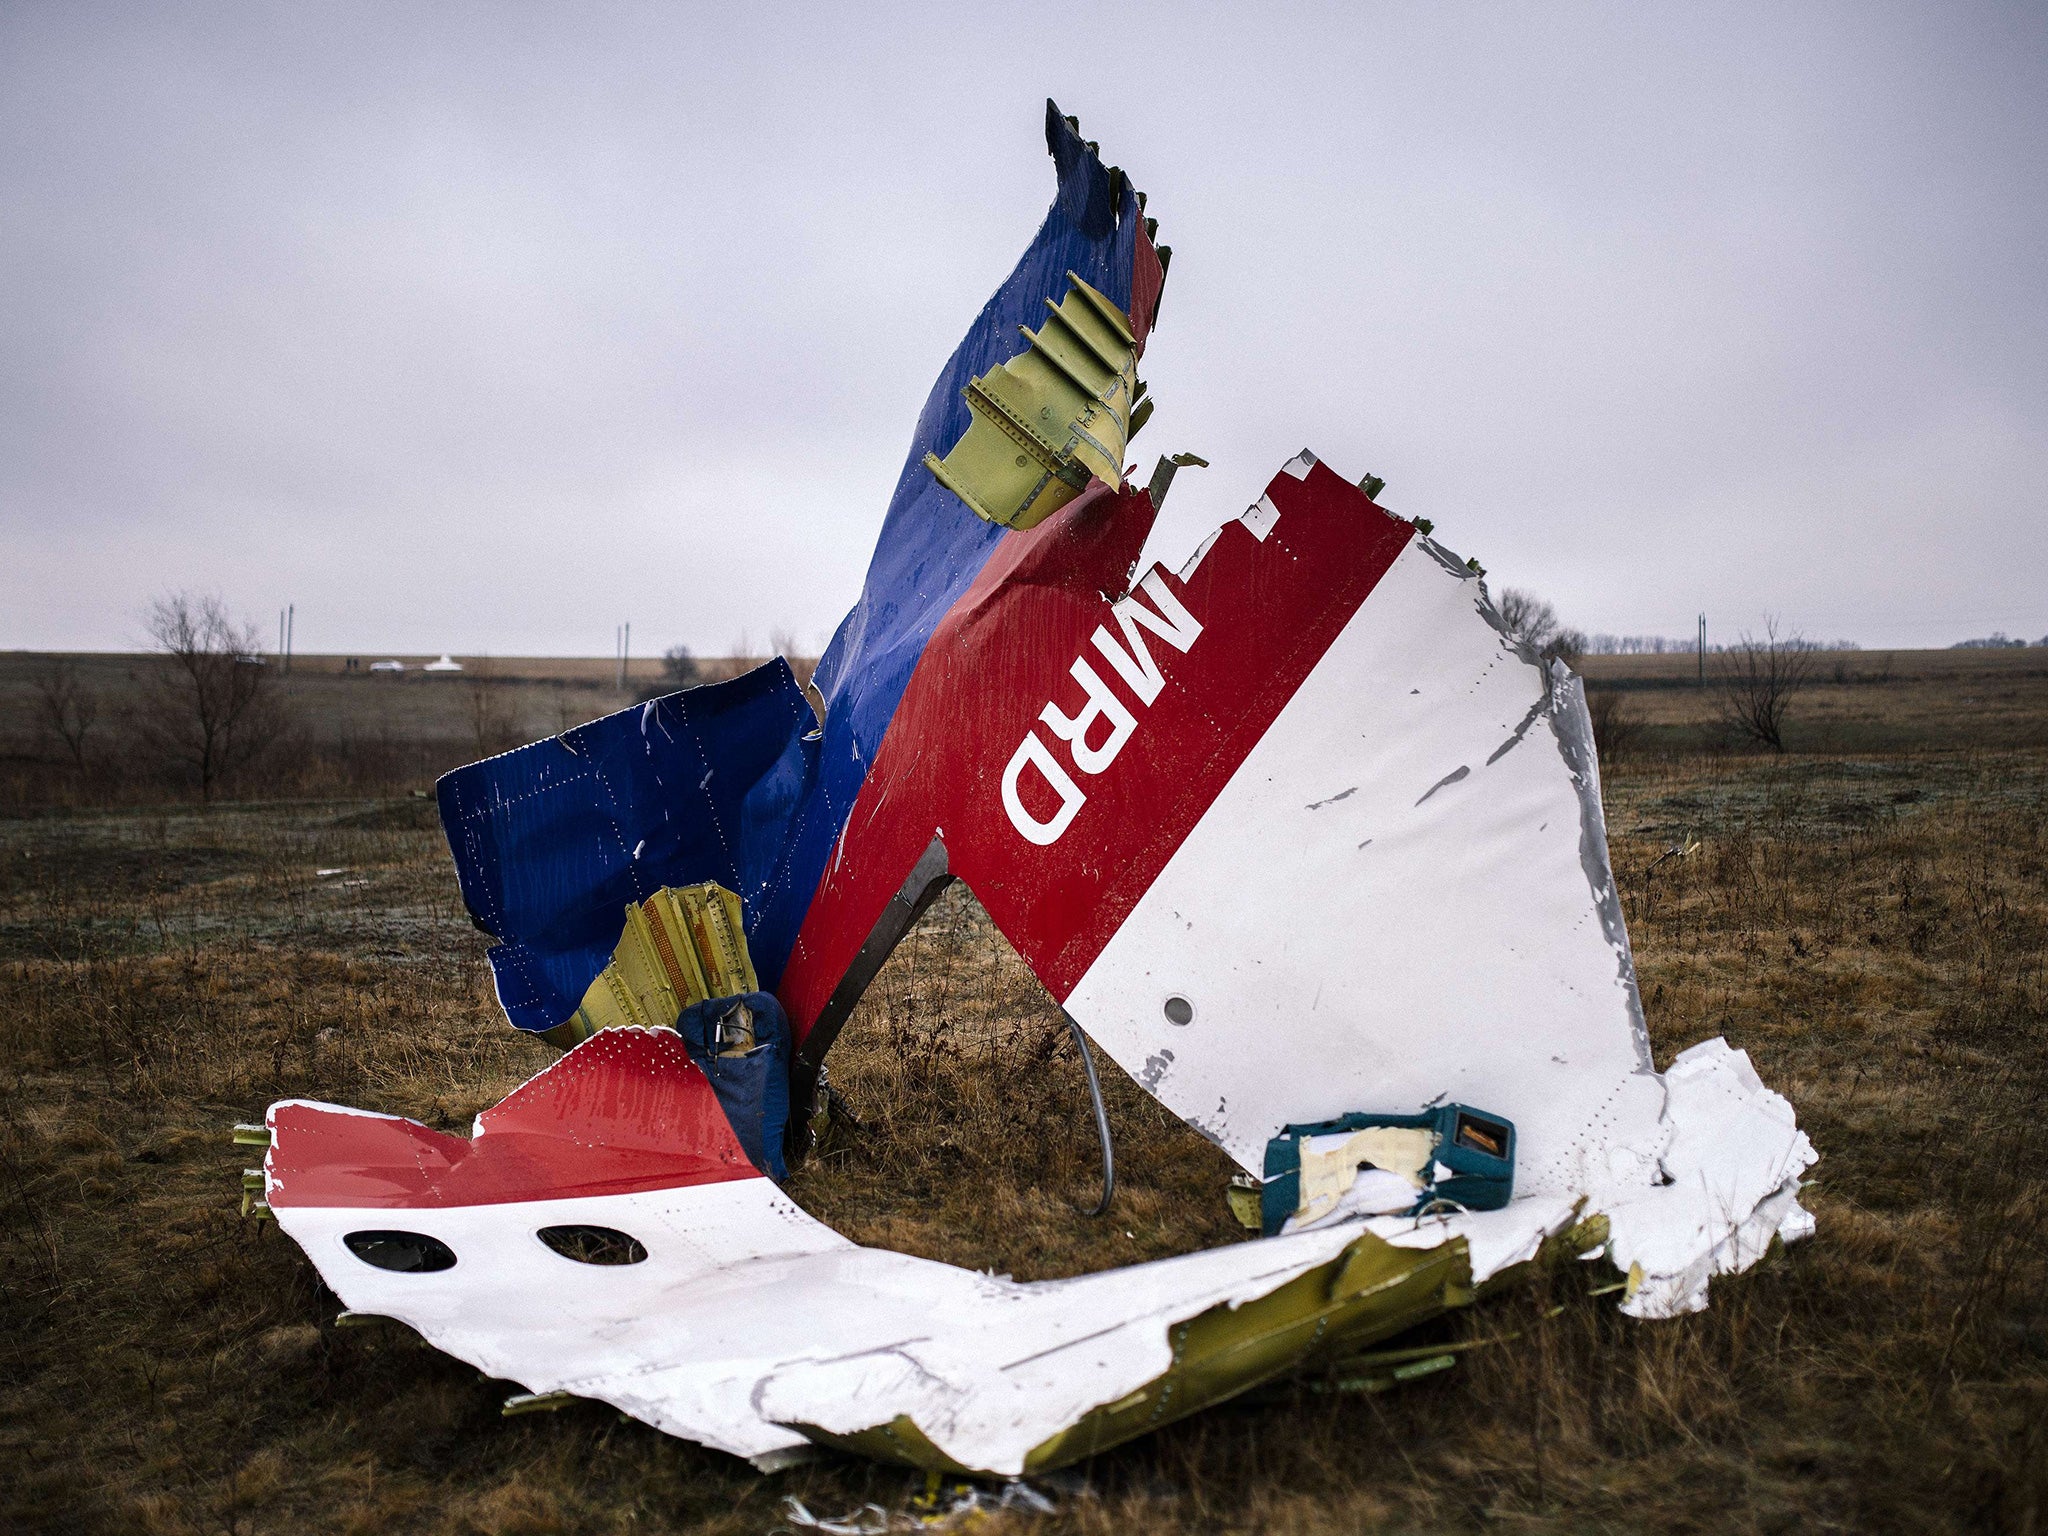 Parts of the Malaysia Airlines Flight MH17 at the crash site near the village of Hrabove, Ukraine, some 80 kms east of the city of Donetsk